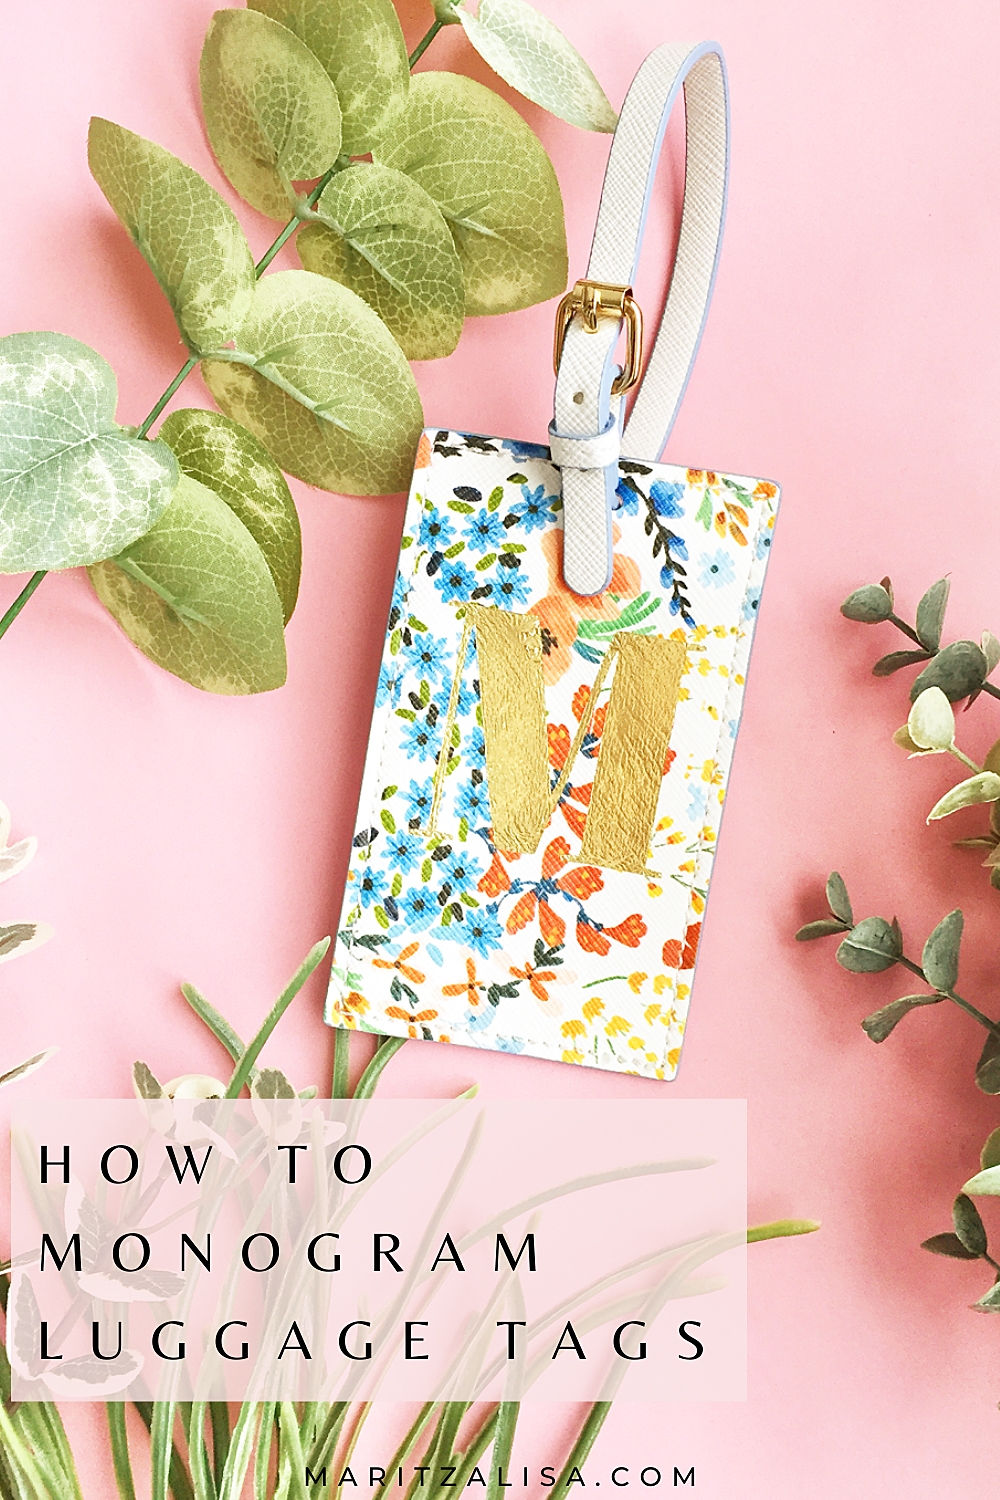 How To Monogram Luggage Tags